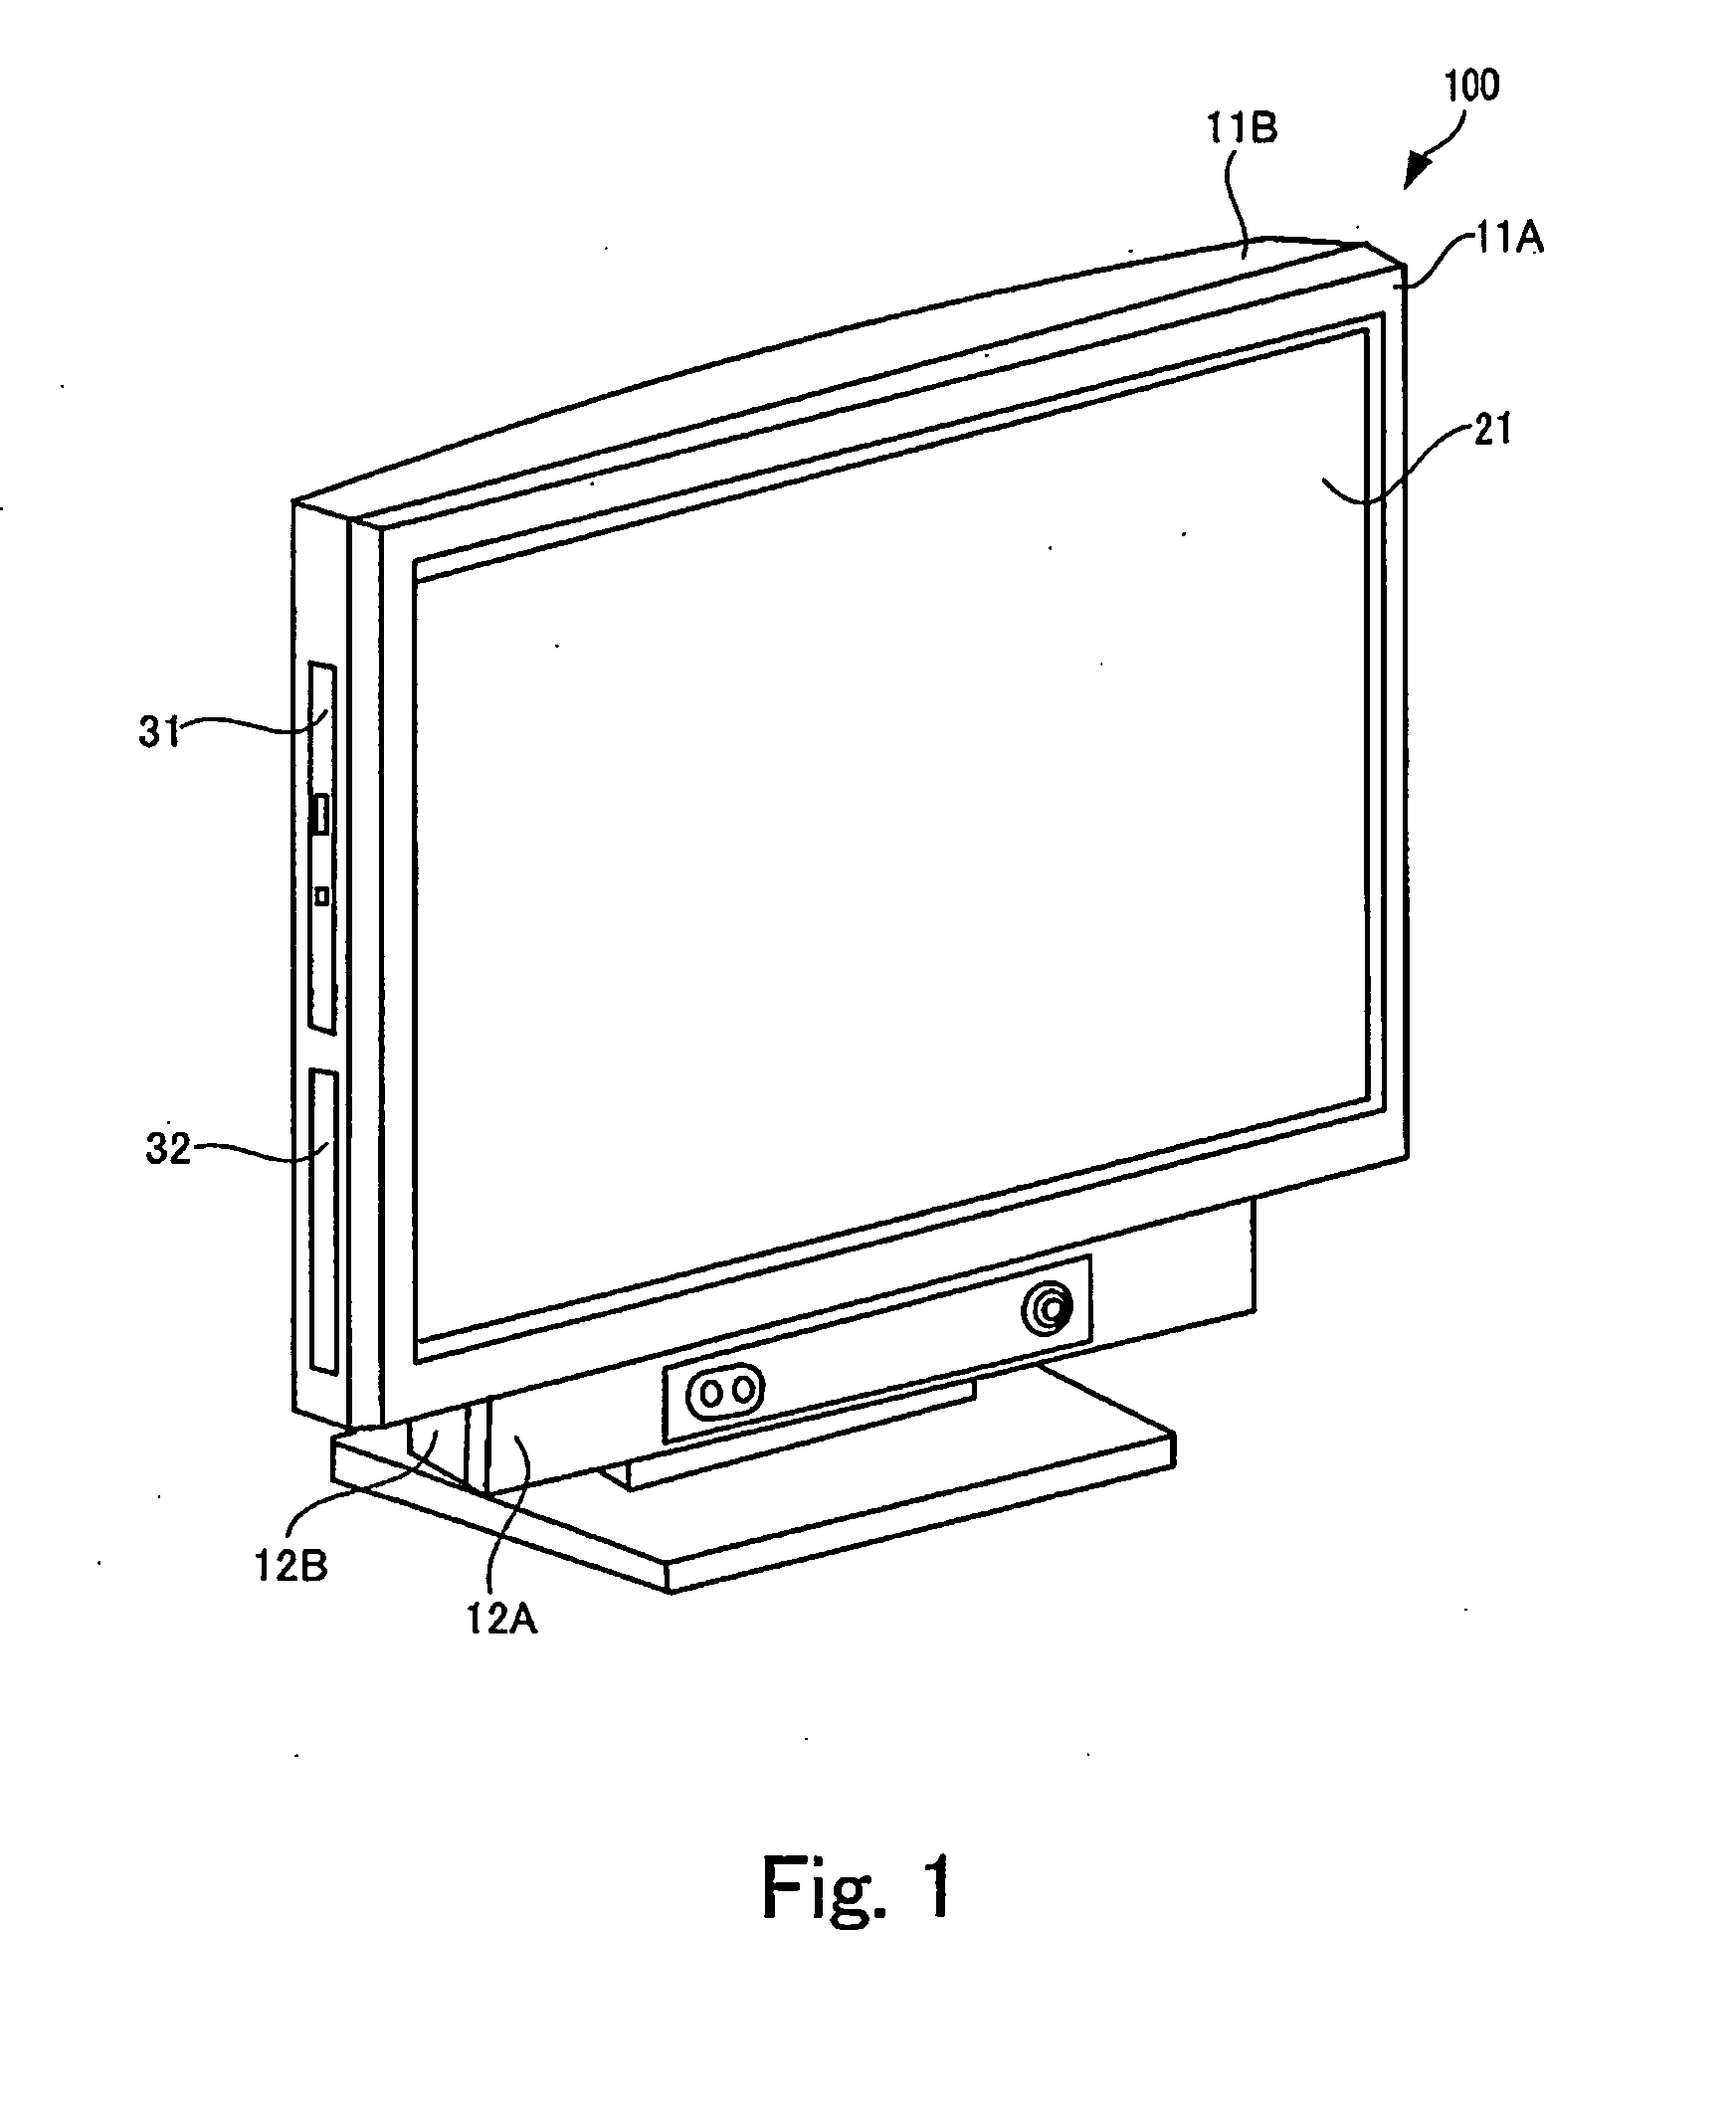 Electronic device and printed circuit board unit